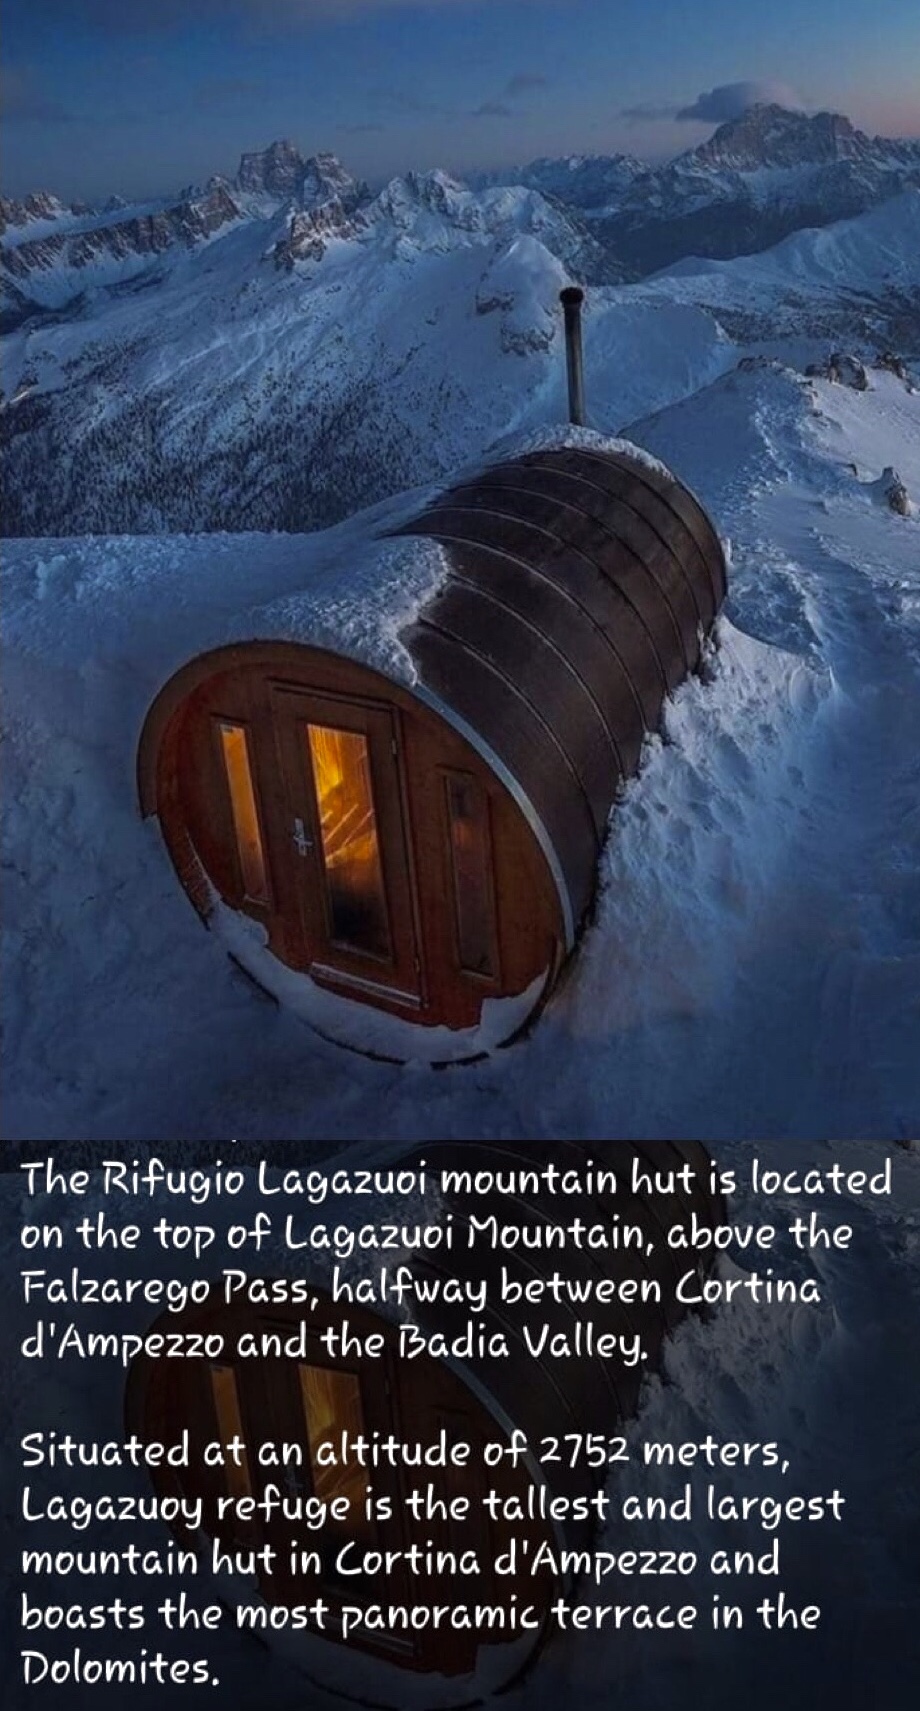 sky - The Rifugio Lagazuoi mountain hut is located on the top of Lagazuoi Mountain, above the Falzarego Pass, halfway between Cortina d'Ampezzo and the Badia Valley. Situated at an altitude of 2752 meters, Lagazuoy refuge is the tallest and largest mounta